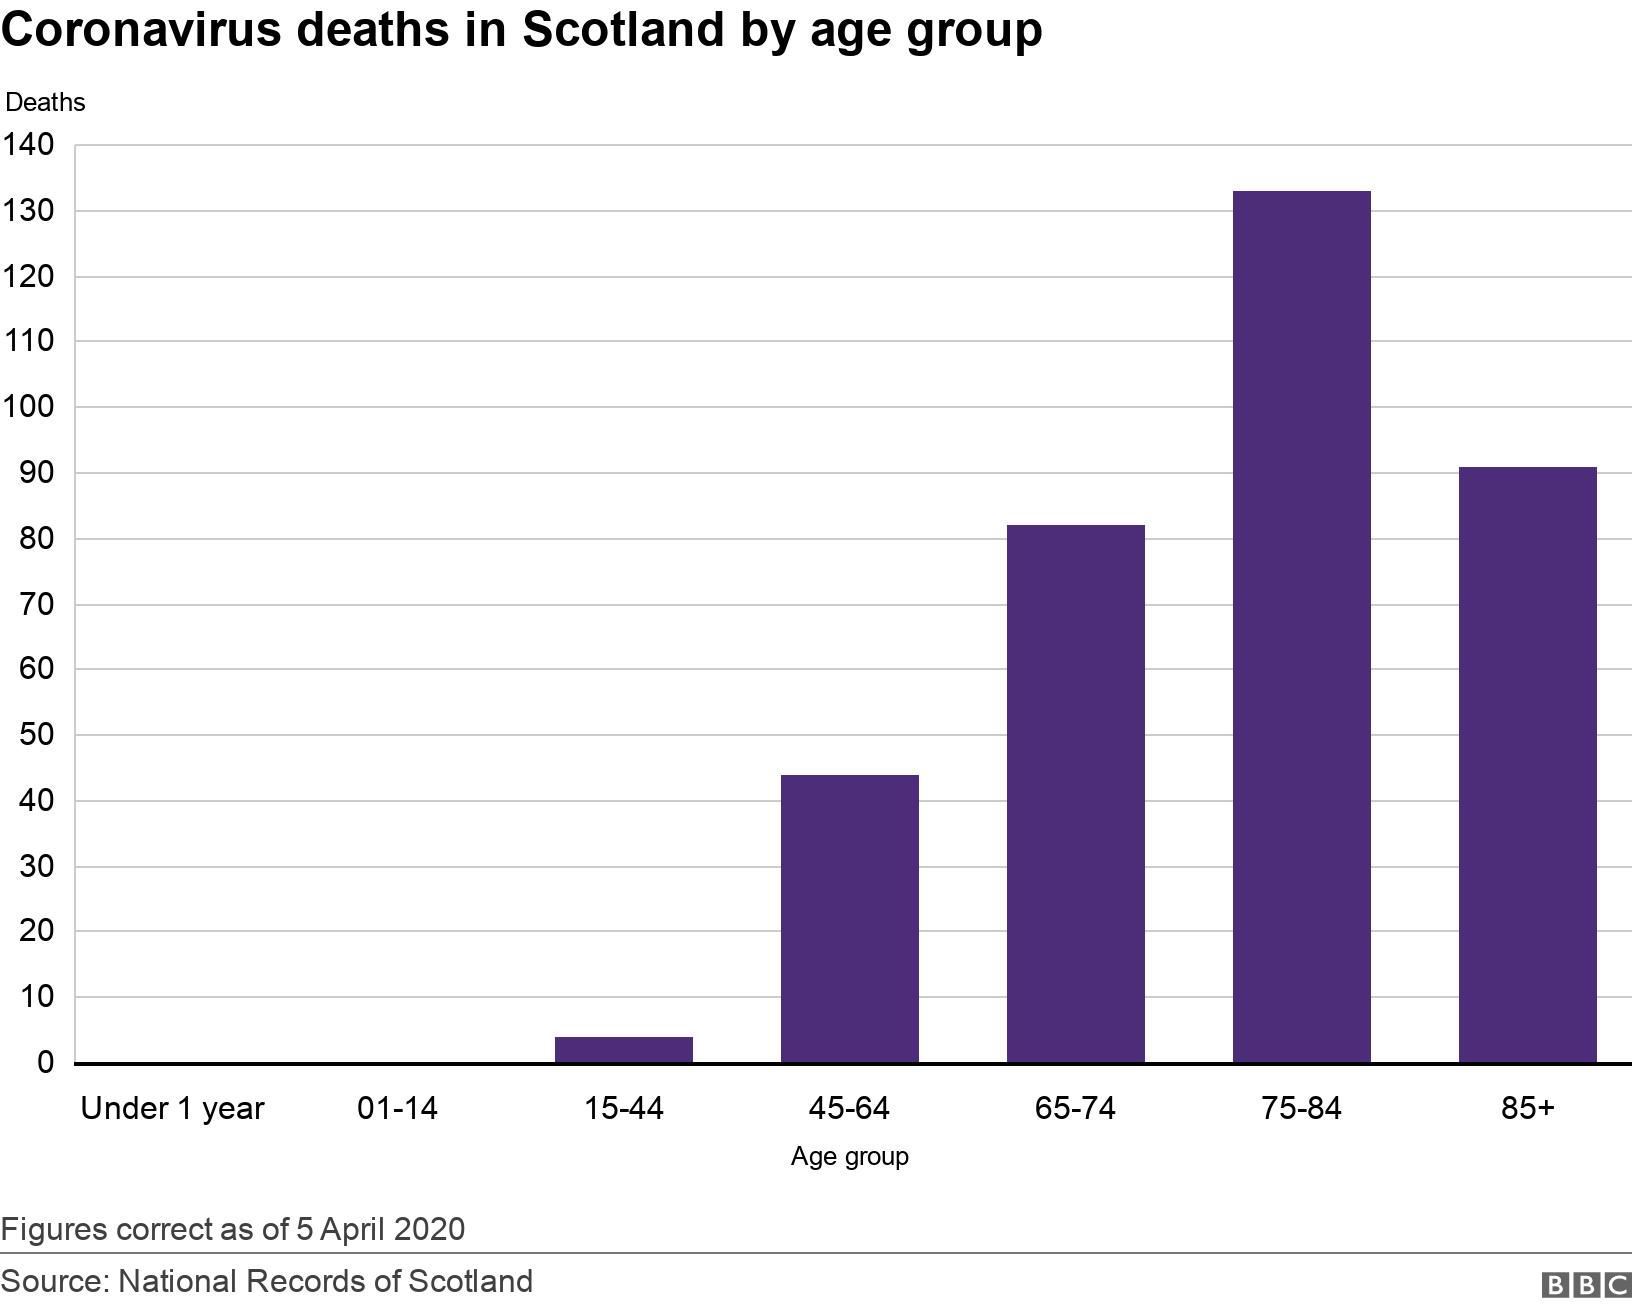 Coronavirus deaths in Scotland by age group. .  Figures correct as of 5 April 2020.